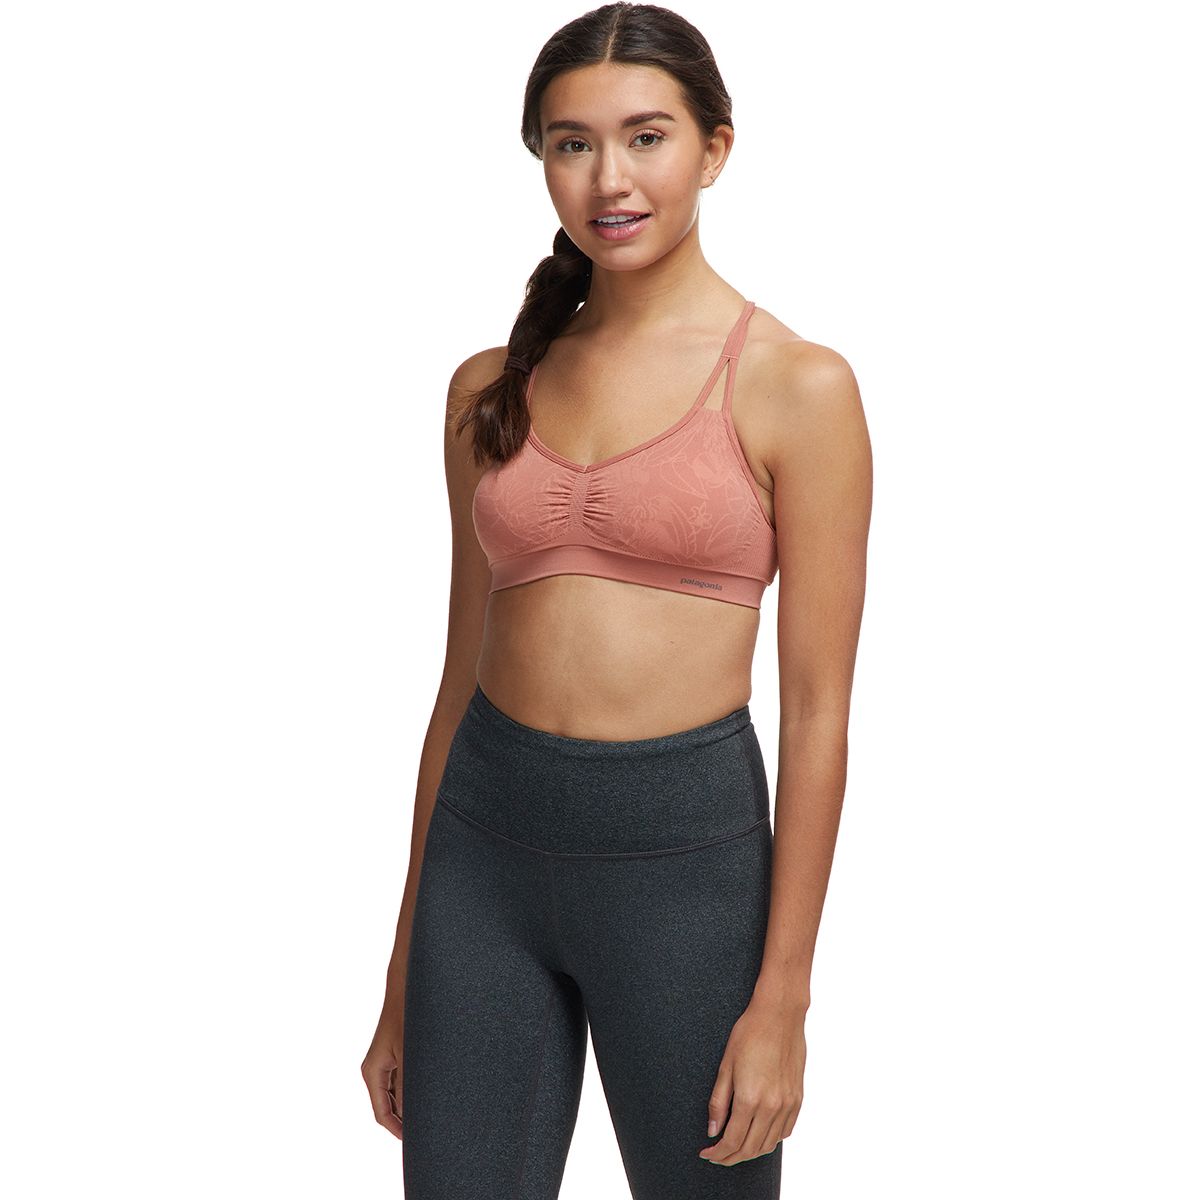 Patagonia Barely Hipster Underwear - Women's